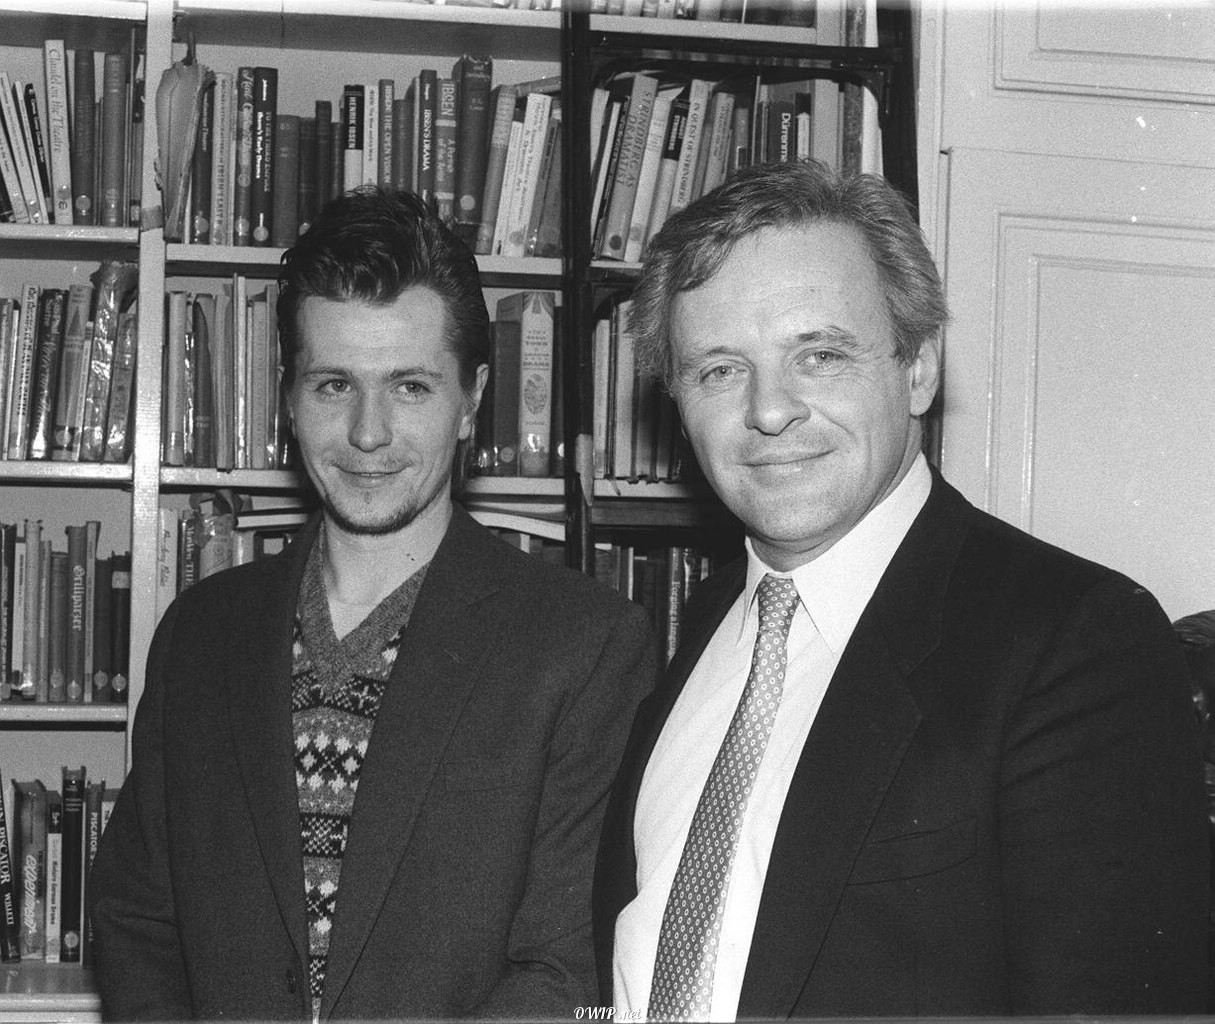 Anthony Hopkins and Gary Oldman in 1980s